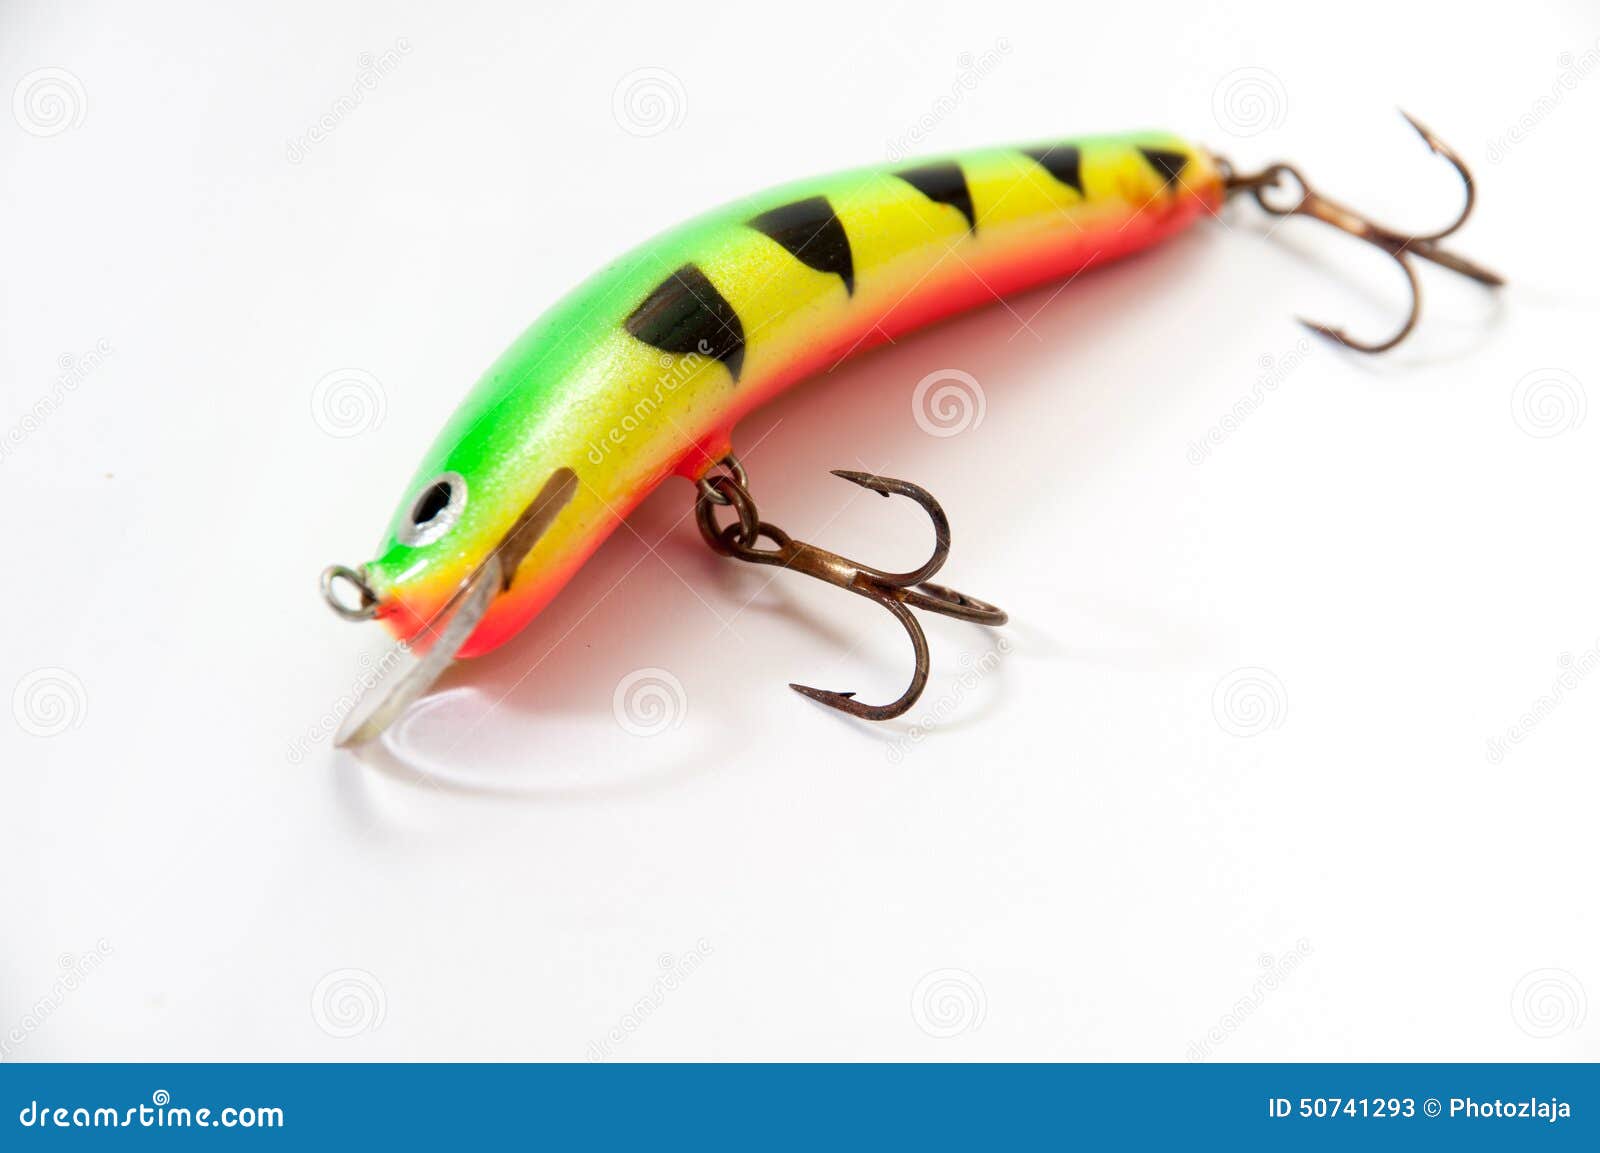 Fire Tiger Design of Fishing Lure Stock Image - Image of